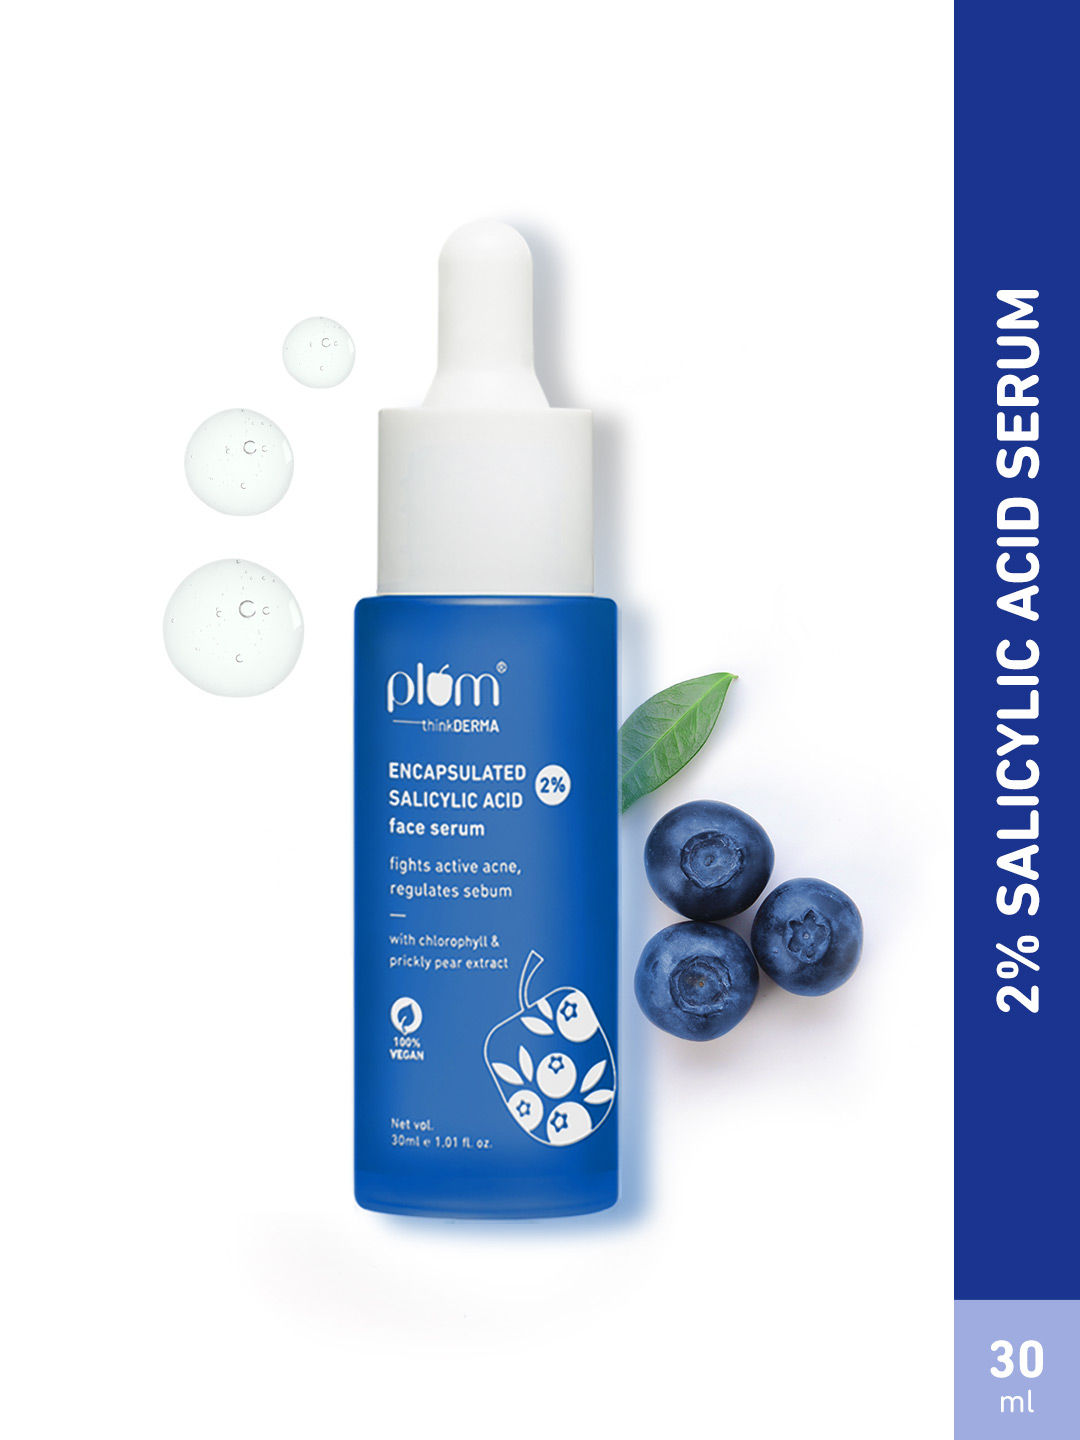 https://media6.ppl-media.com/tr:h-750,w-750,c-at_max,dpr-2/static/img/product/354282/plum-thinkderma-2-percentage-encapsulated-salicylic-acid-face-serum-fights-active-acne-regulates-sebum-controls-oil-calms-and-soothes-inflammation-lightweight-and-quick-absorbing-100-percentage-vegan-30-ml_7_display_1701076406_678a37c7.jpg